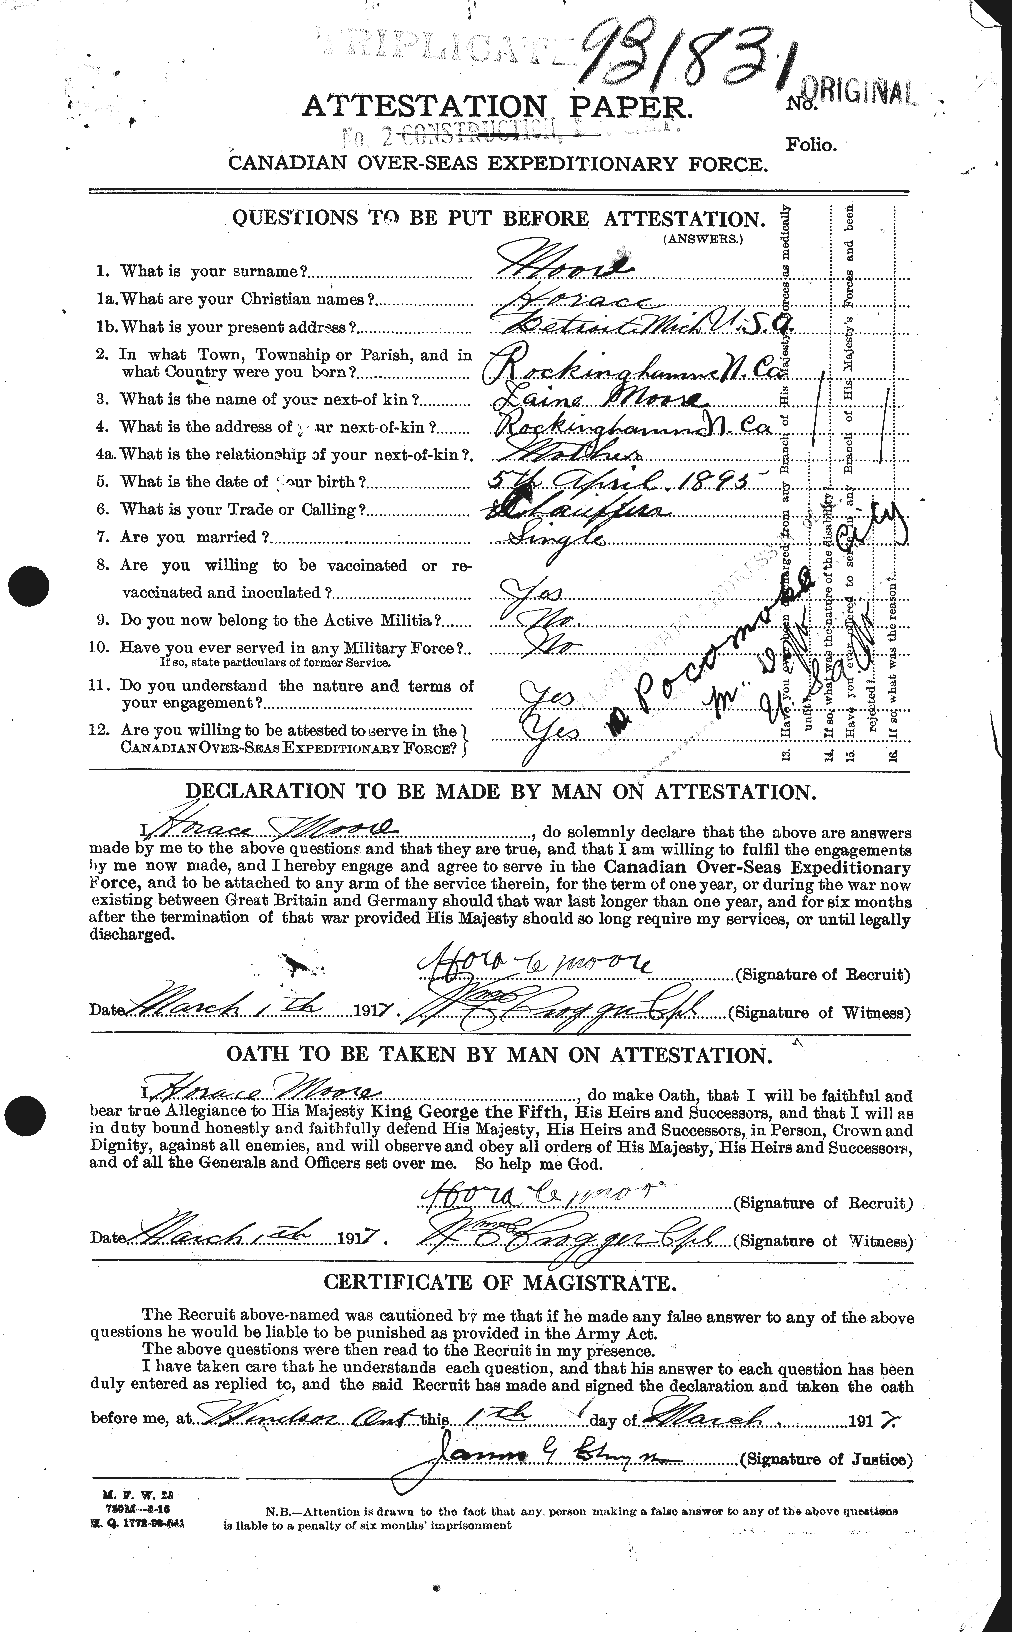 Personnel Records of the First World War - CEF 502132a